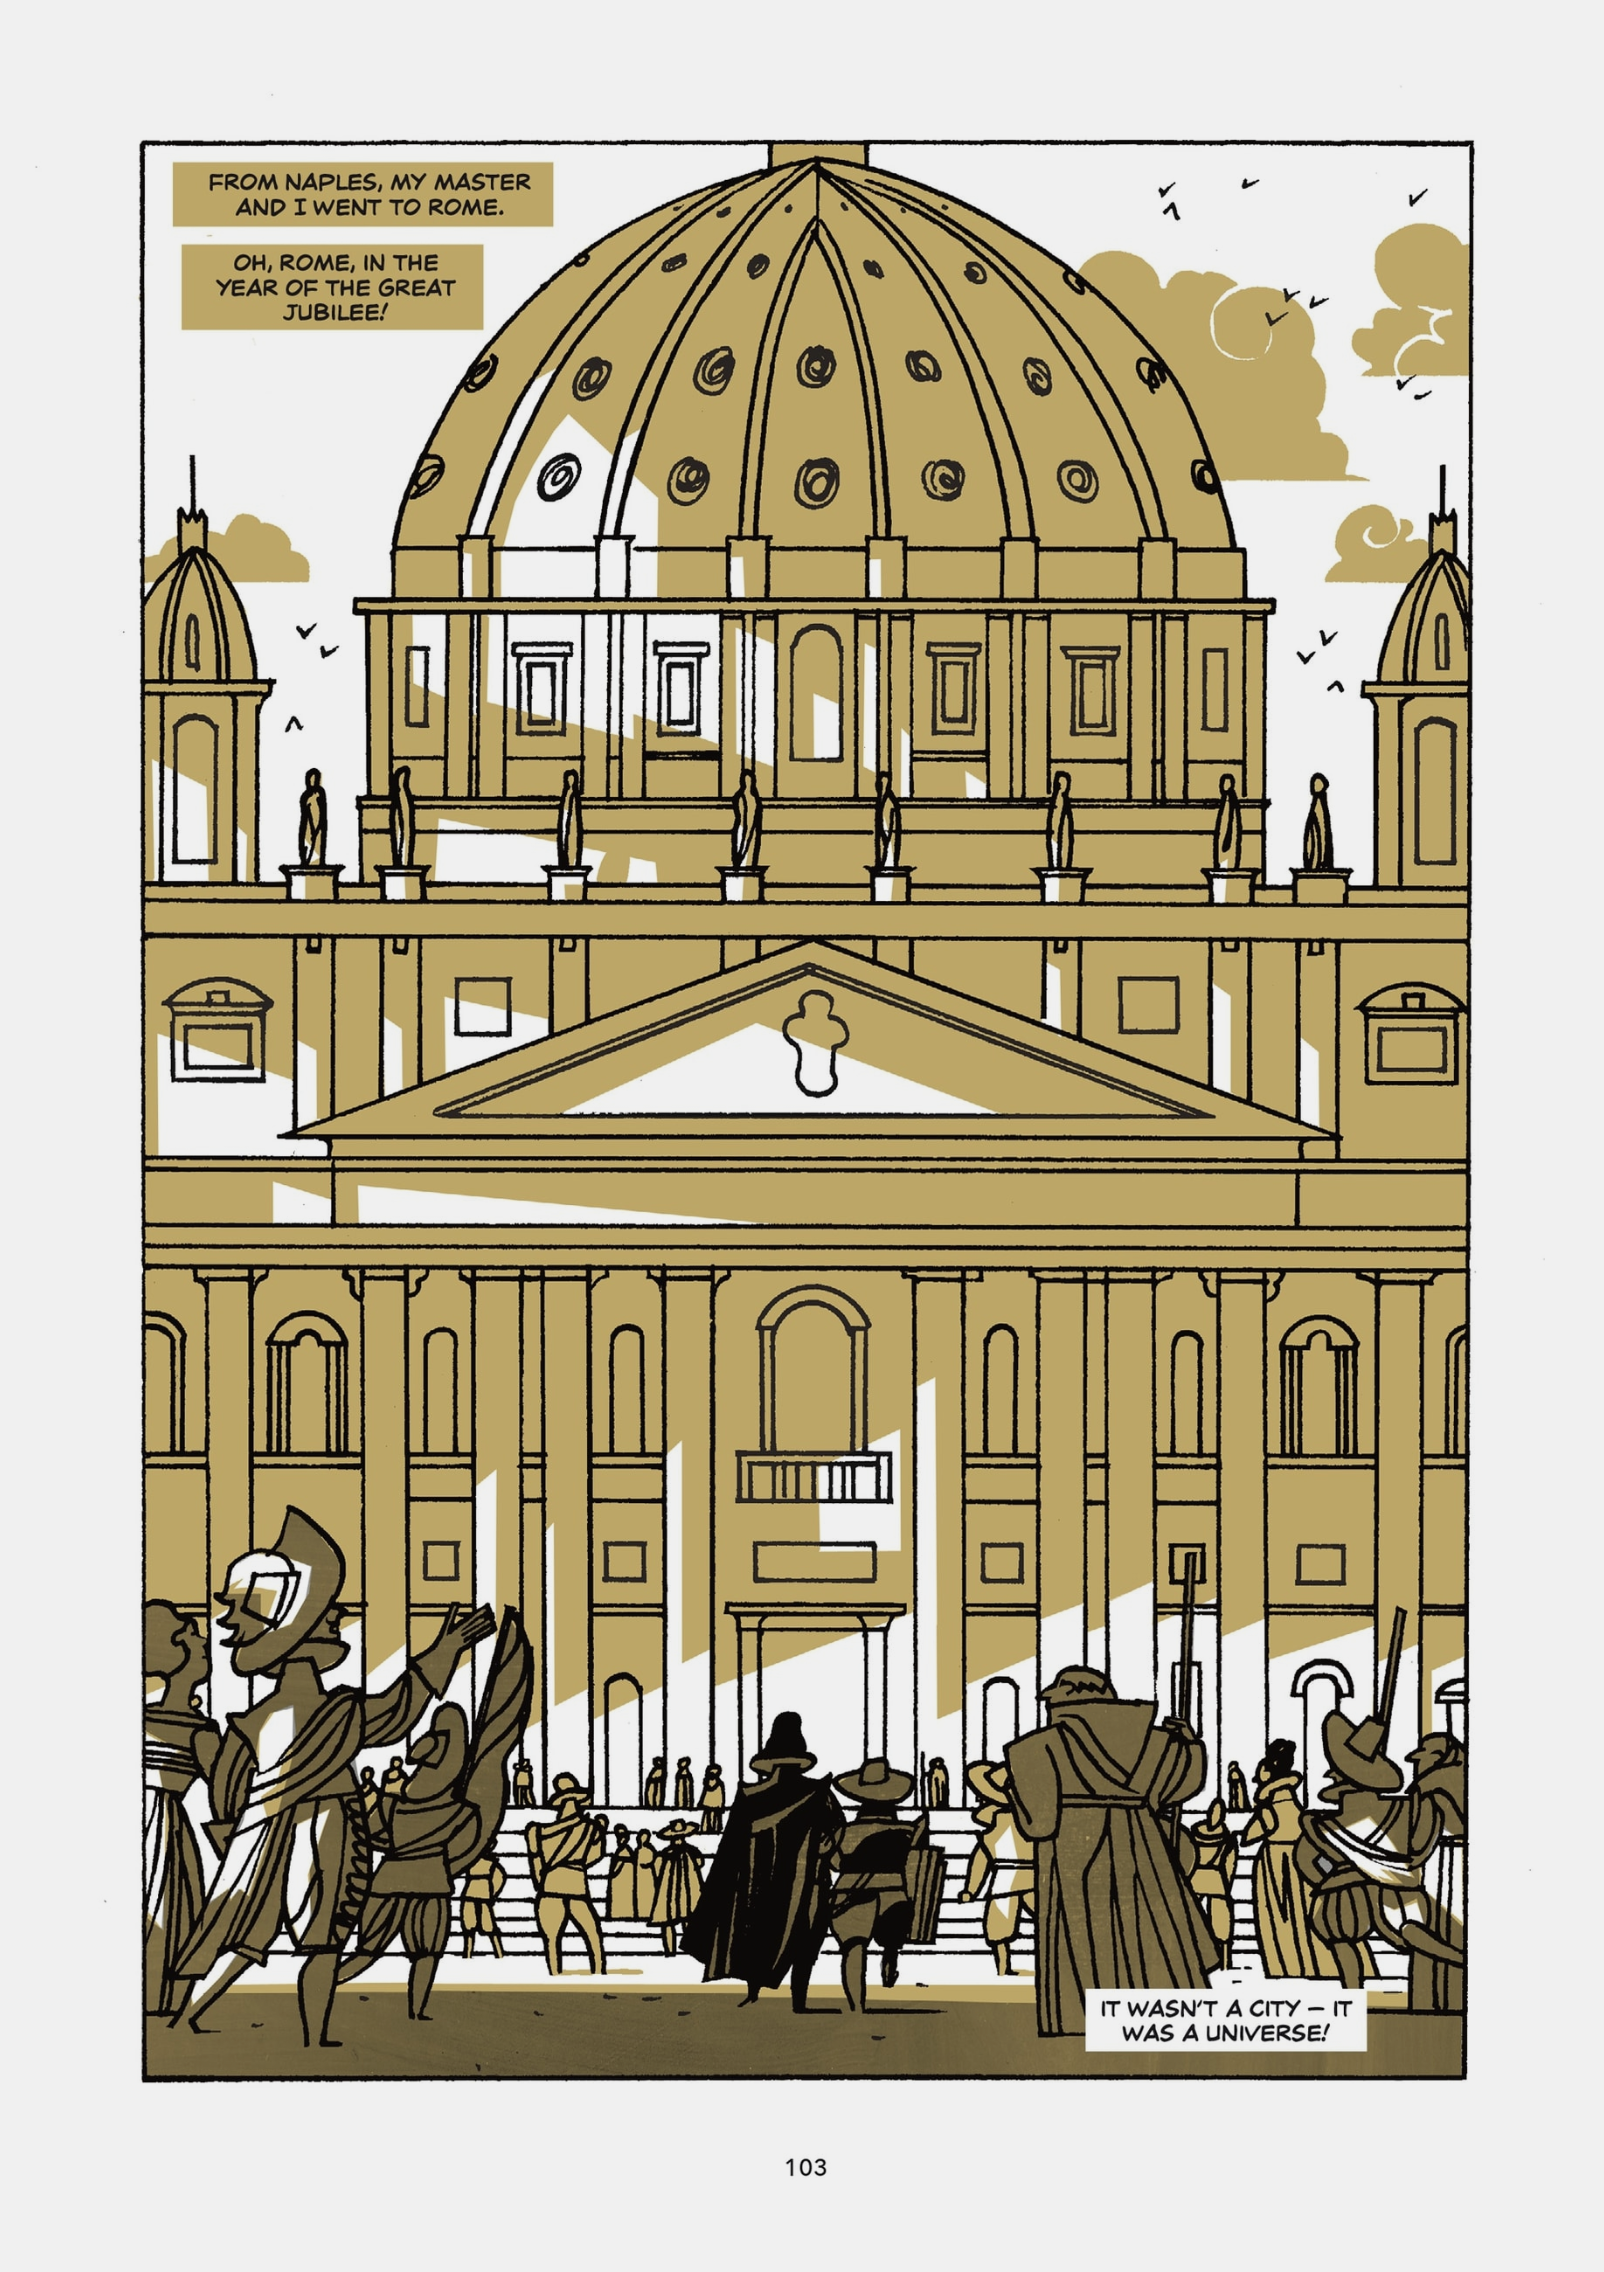 a panel from the graphic novel showing a building with a dome in Rome, drawn in black, white, and gold